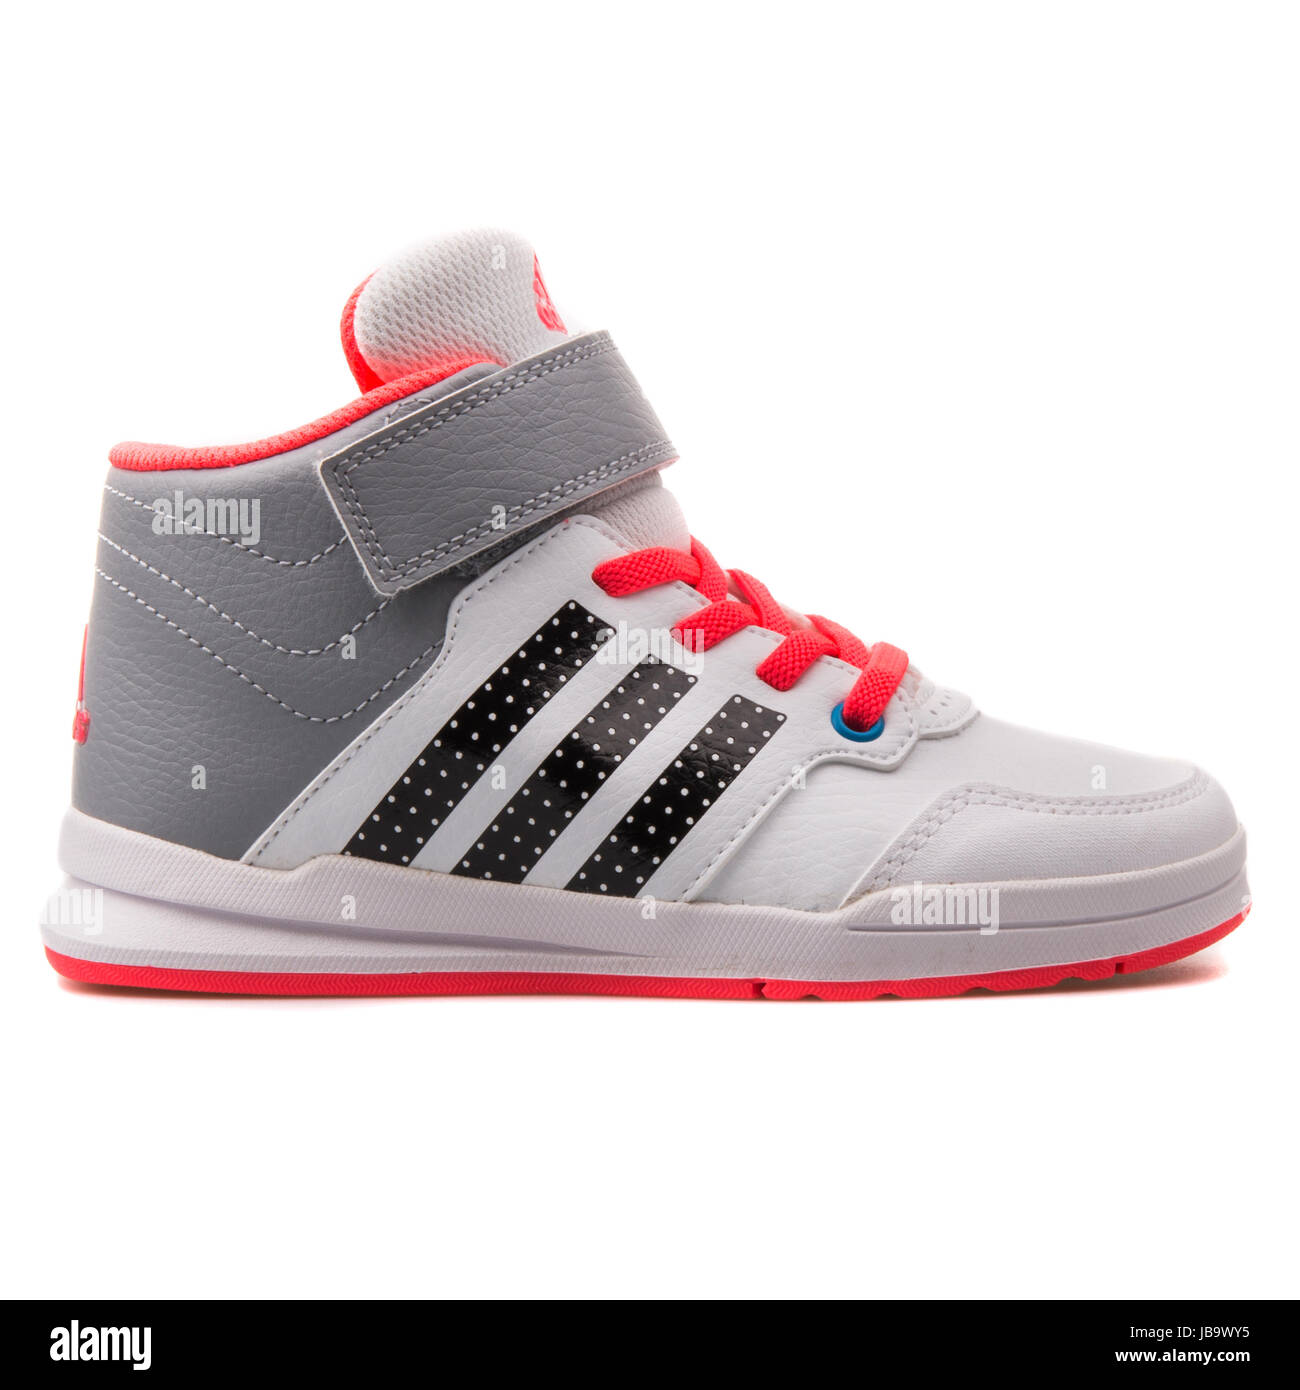 Adidas Jan BS 2 Mid C White, Grey and 